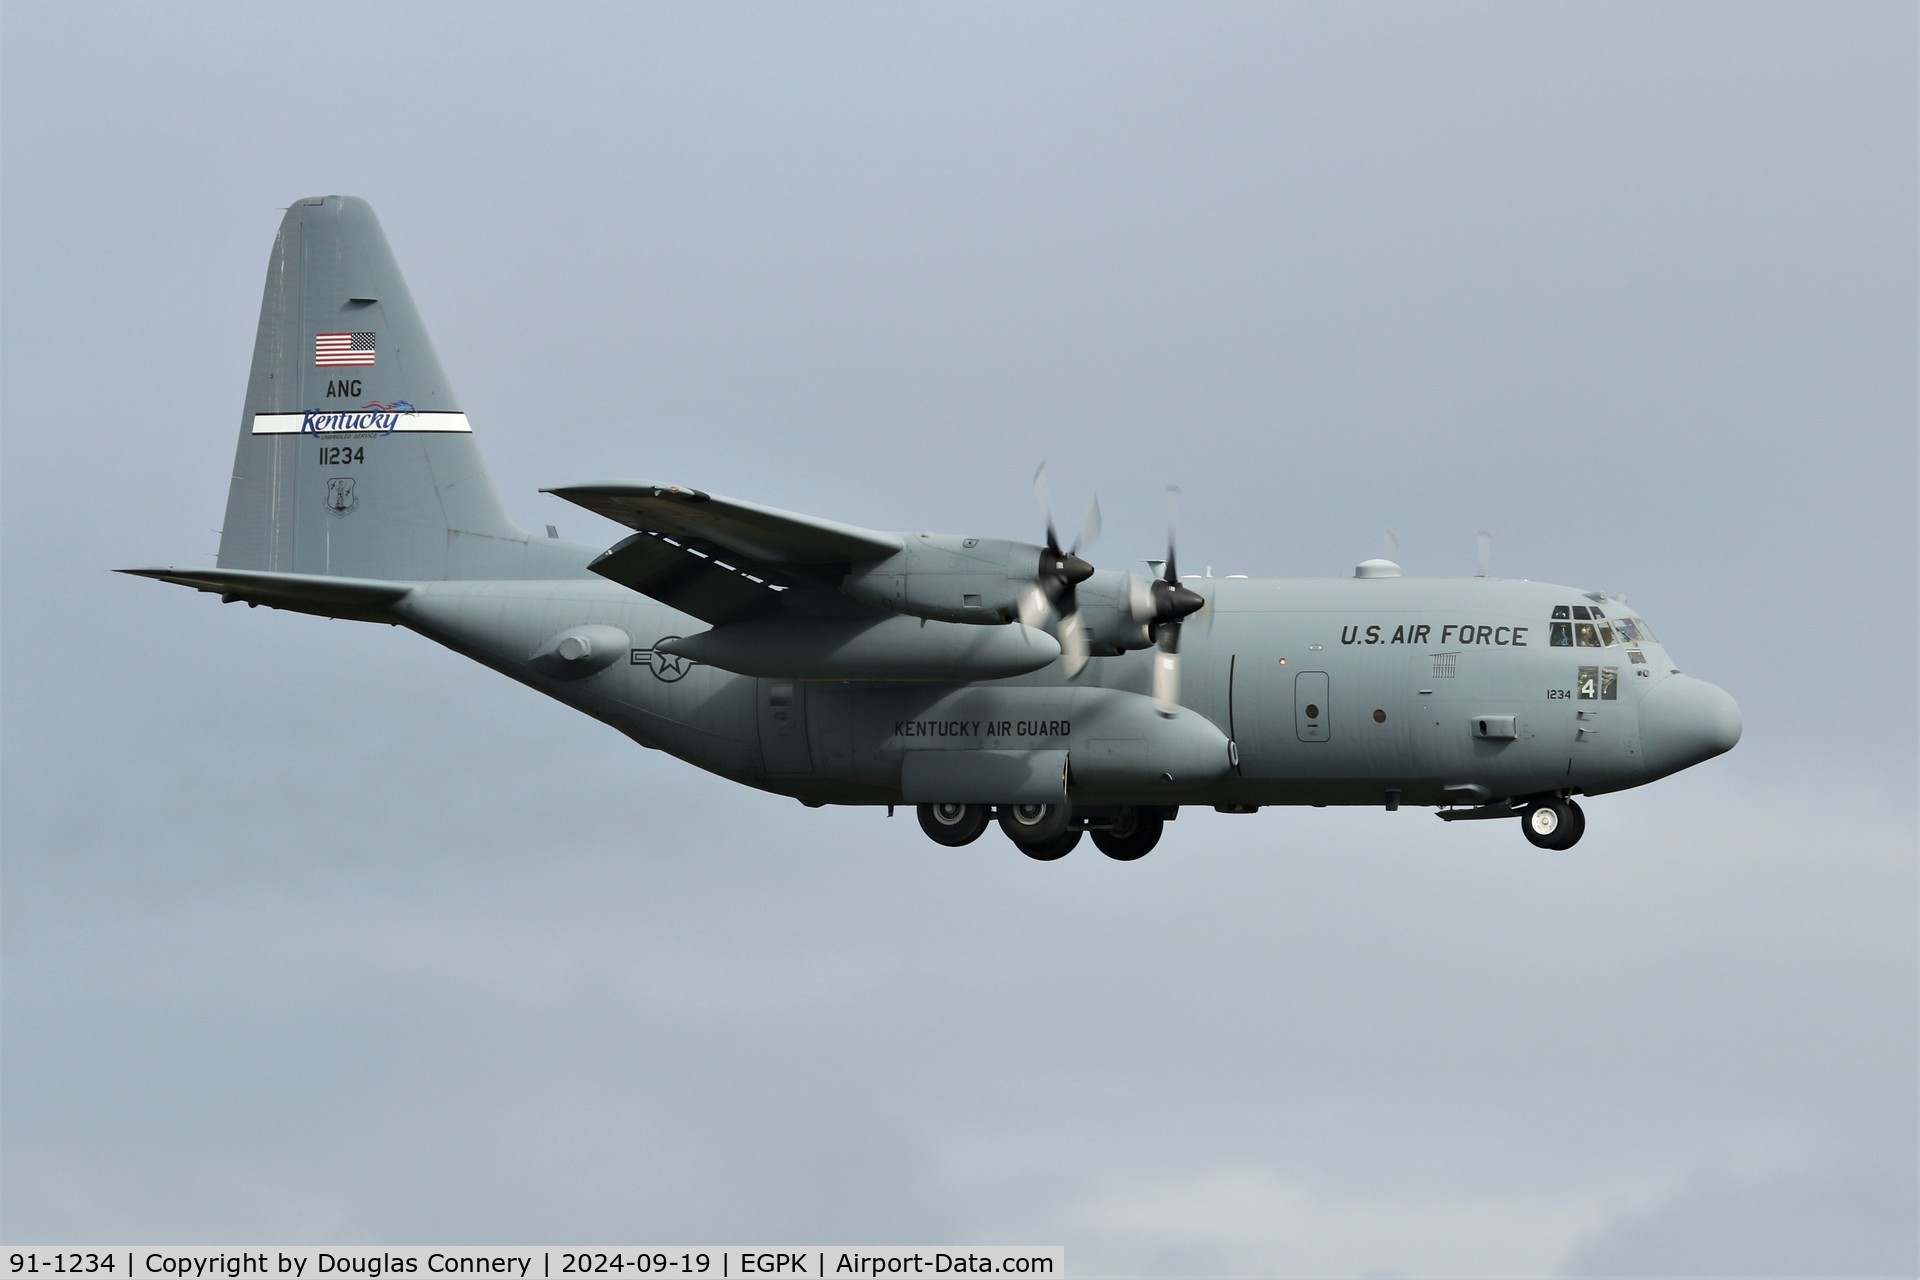 91-1234, 1991 Lockheed C-130H Hercules C/N 382-5284, On approach for runway 12 at Prestwick C/S RCH203